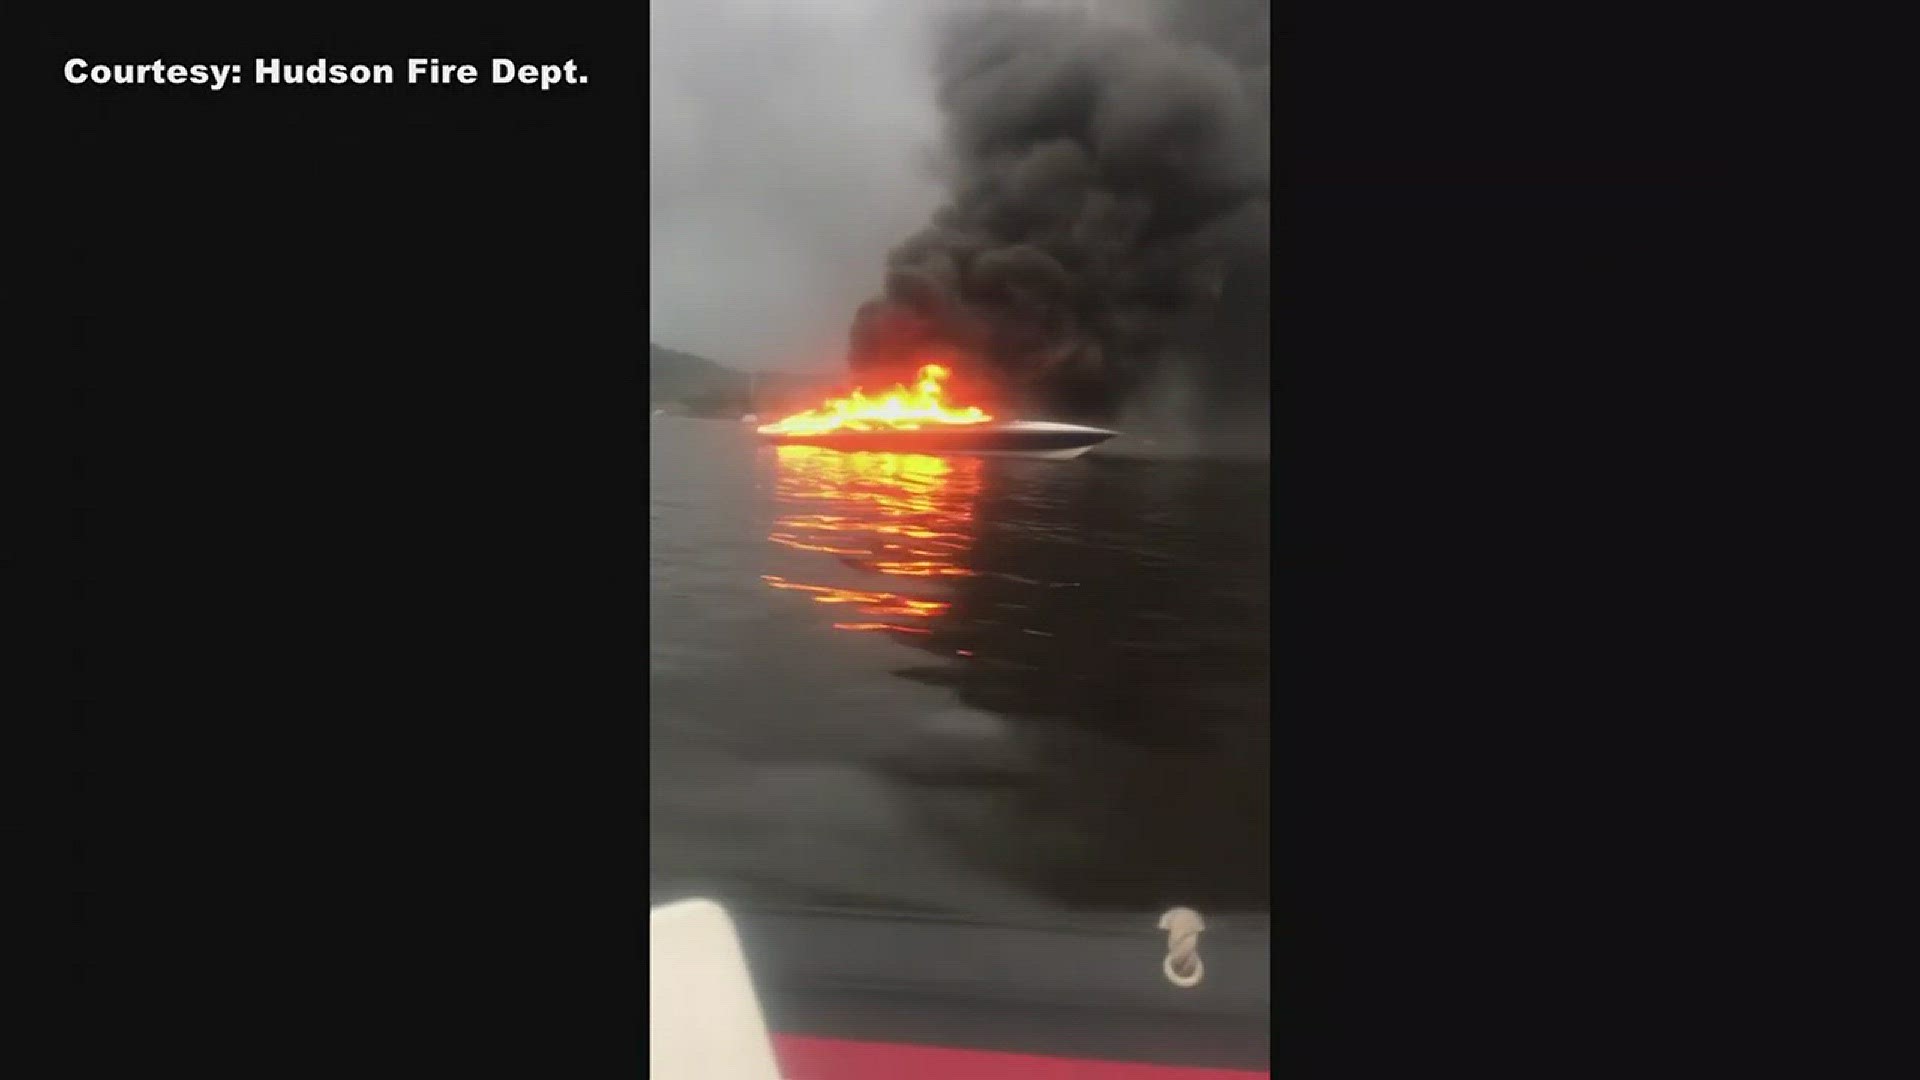 According to the Hudson Fire Department, no one was injured when a boat exploded on the St. Croix River on Friday. https://kare11.tv/2vGe1sK